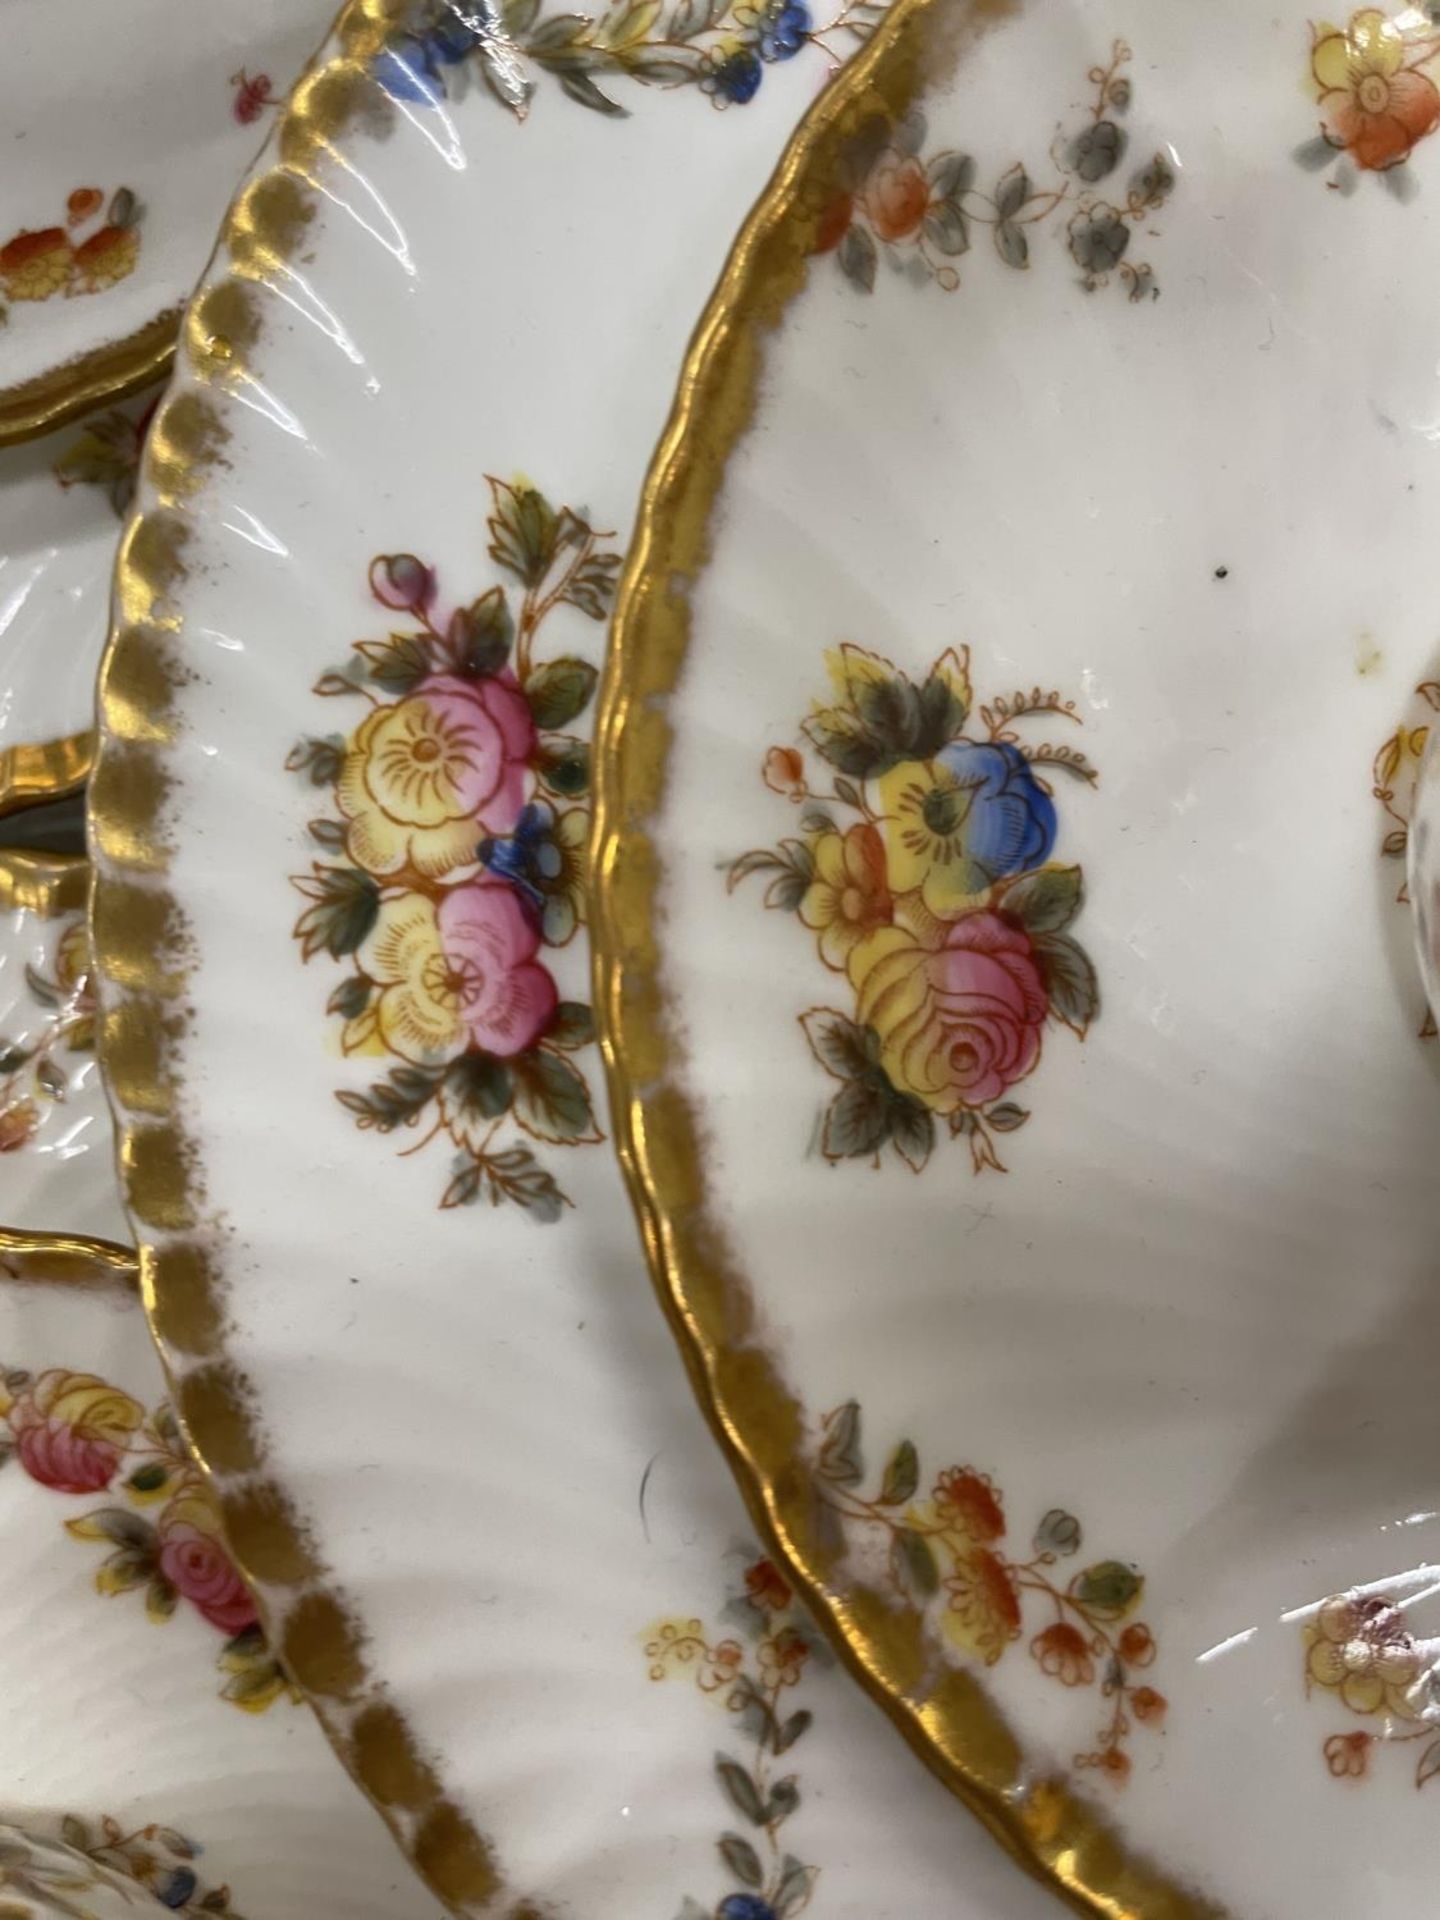 A COLLECTION OF CIRCA LATE 1800'S/EARLY 19TH CENTURY CHINA CUPS, SAUCERS AND PLATES DECORATED WITH - Image 5 of 6